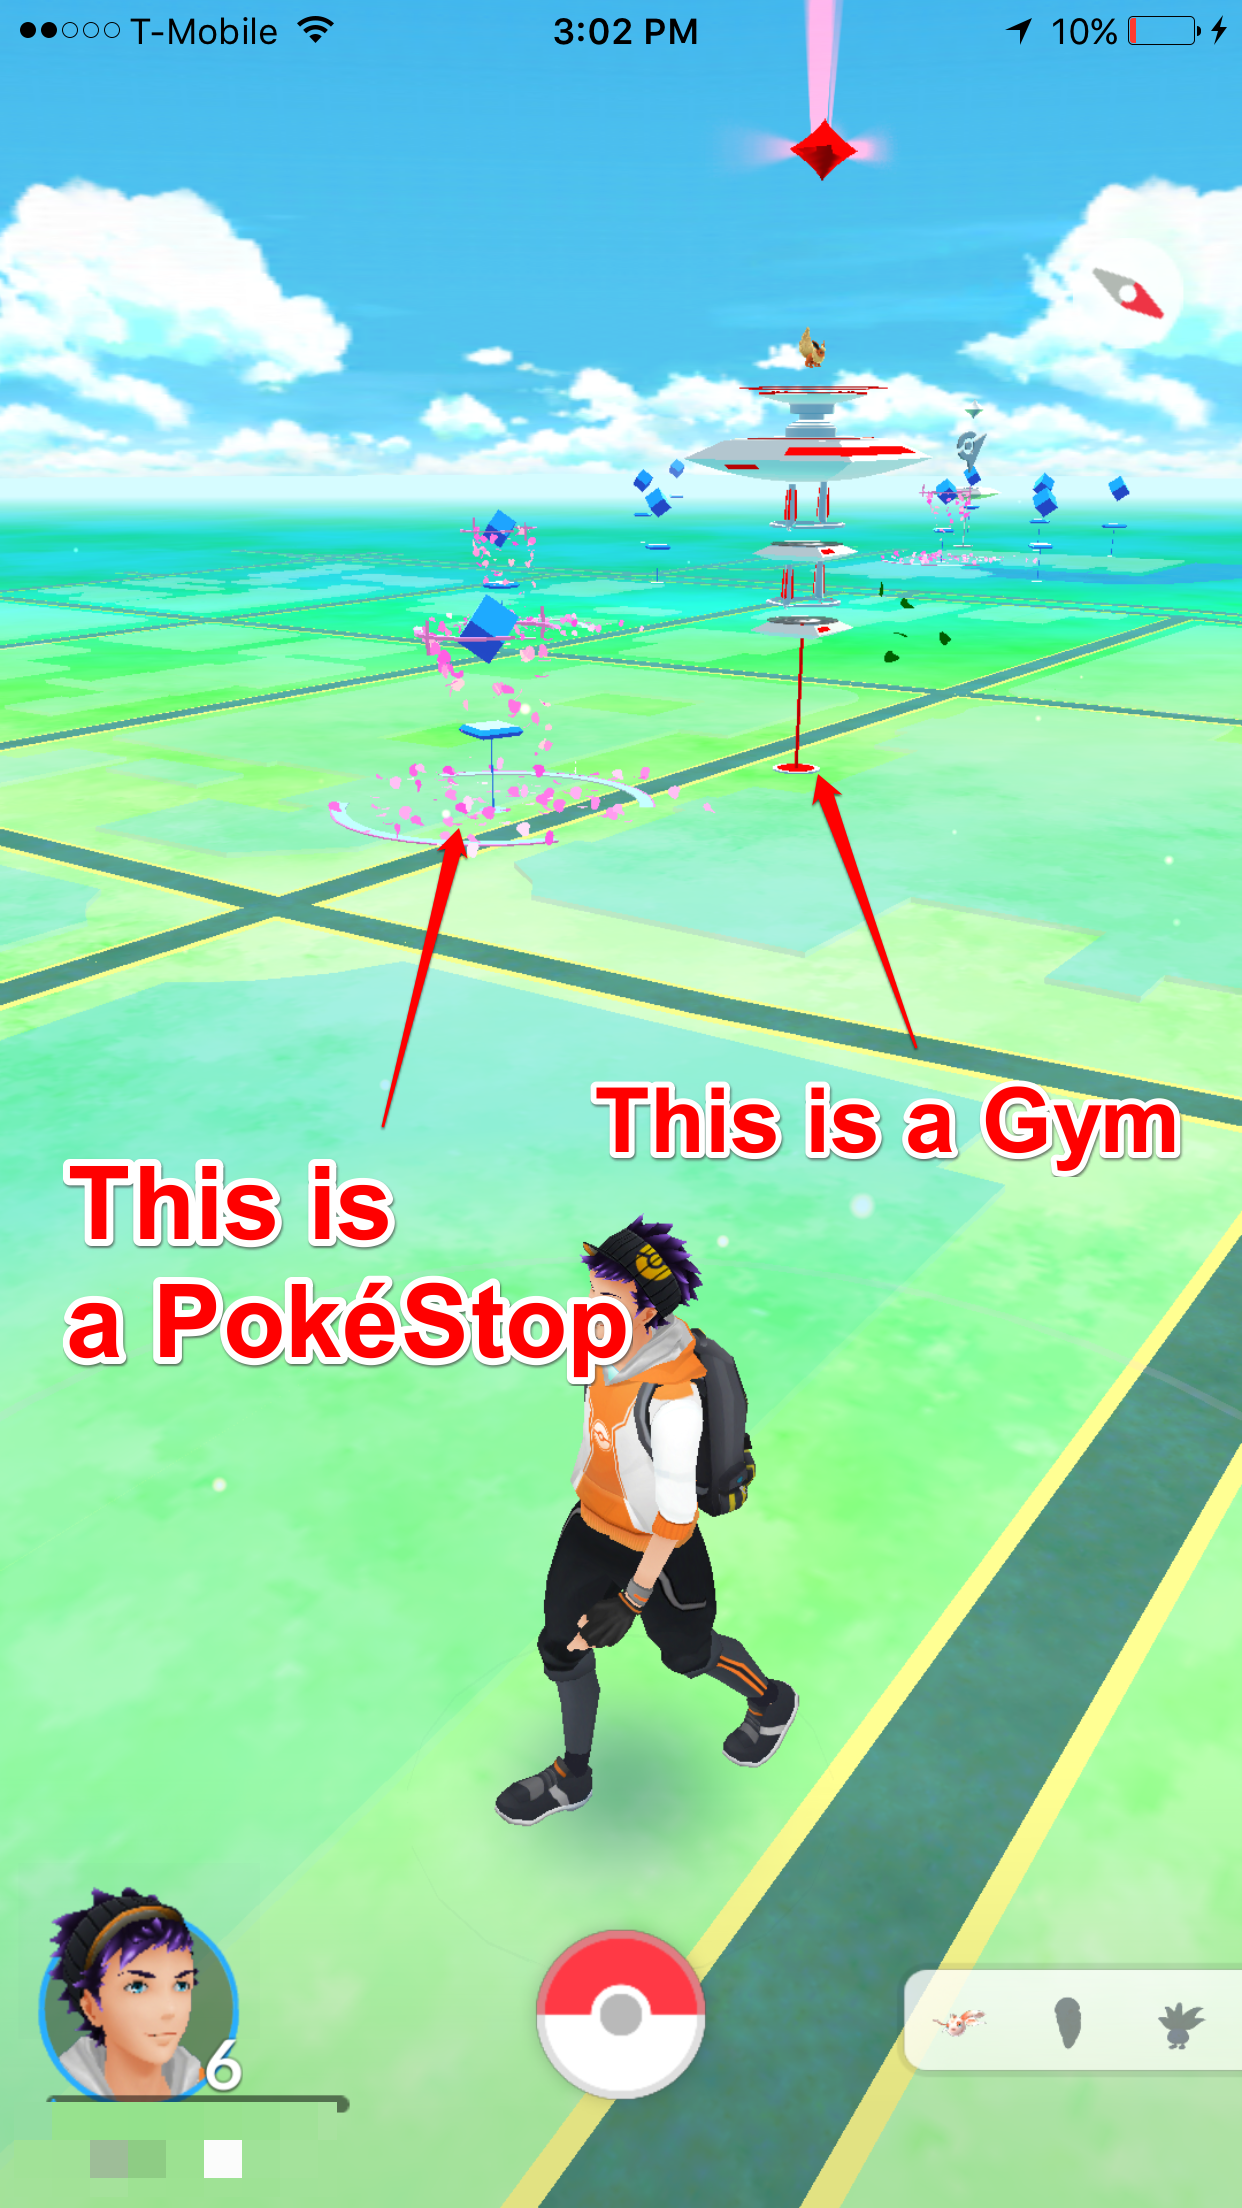 The difference between PokeStops and Training Gyms